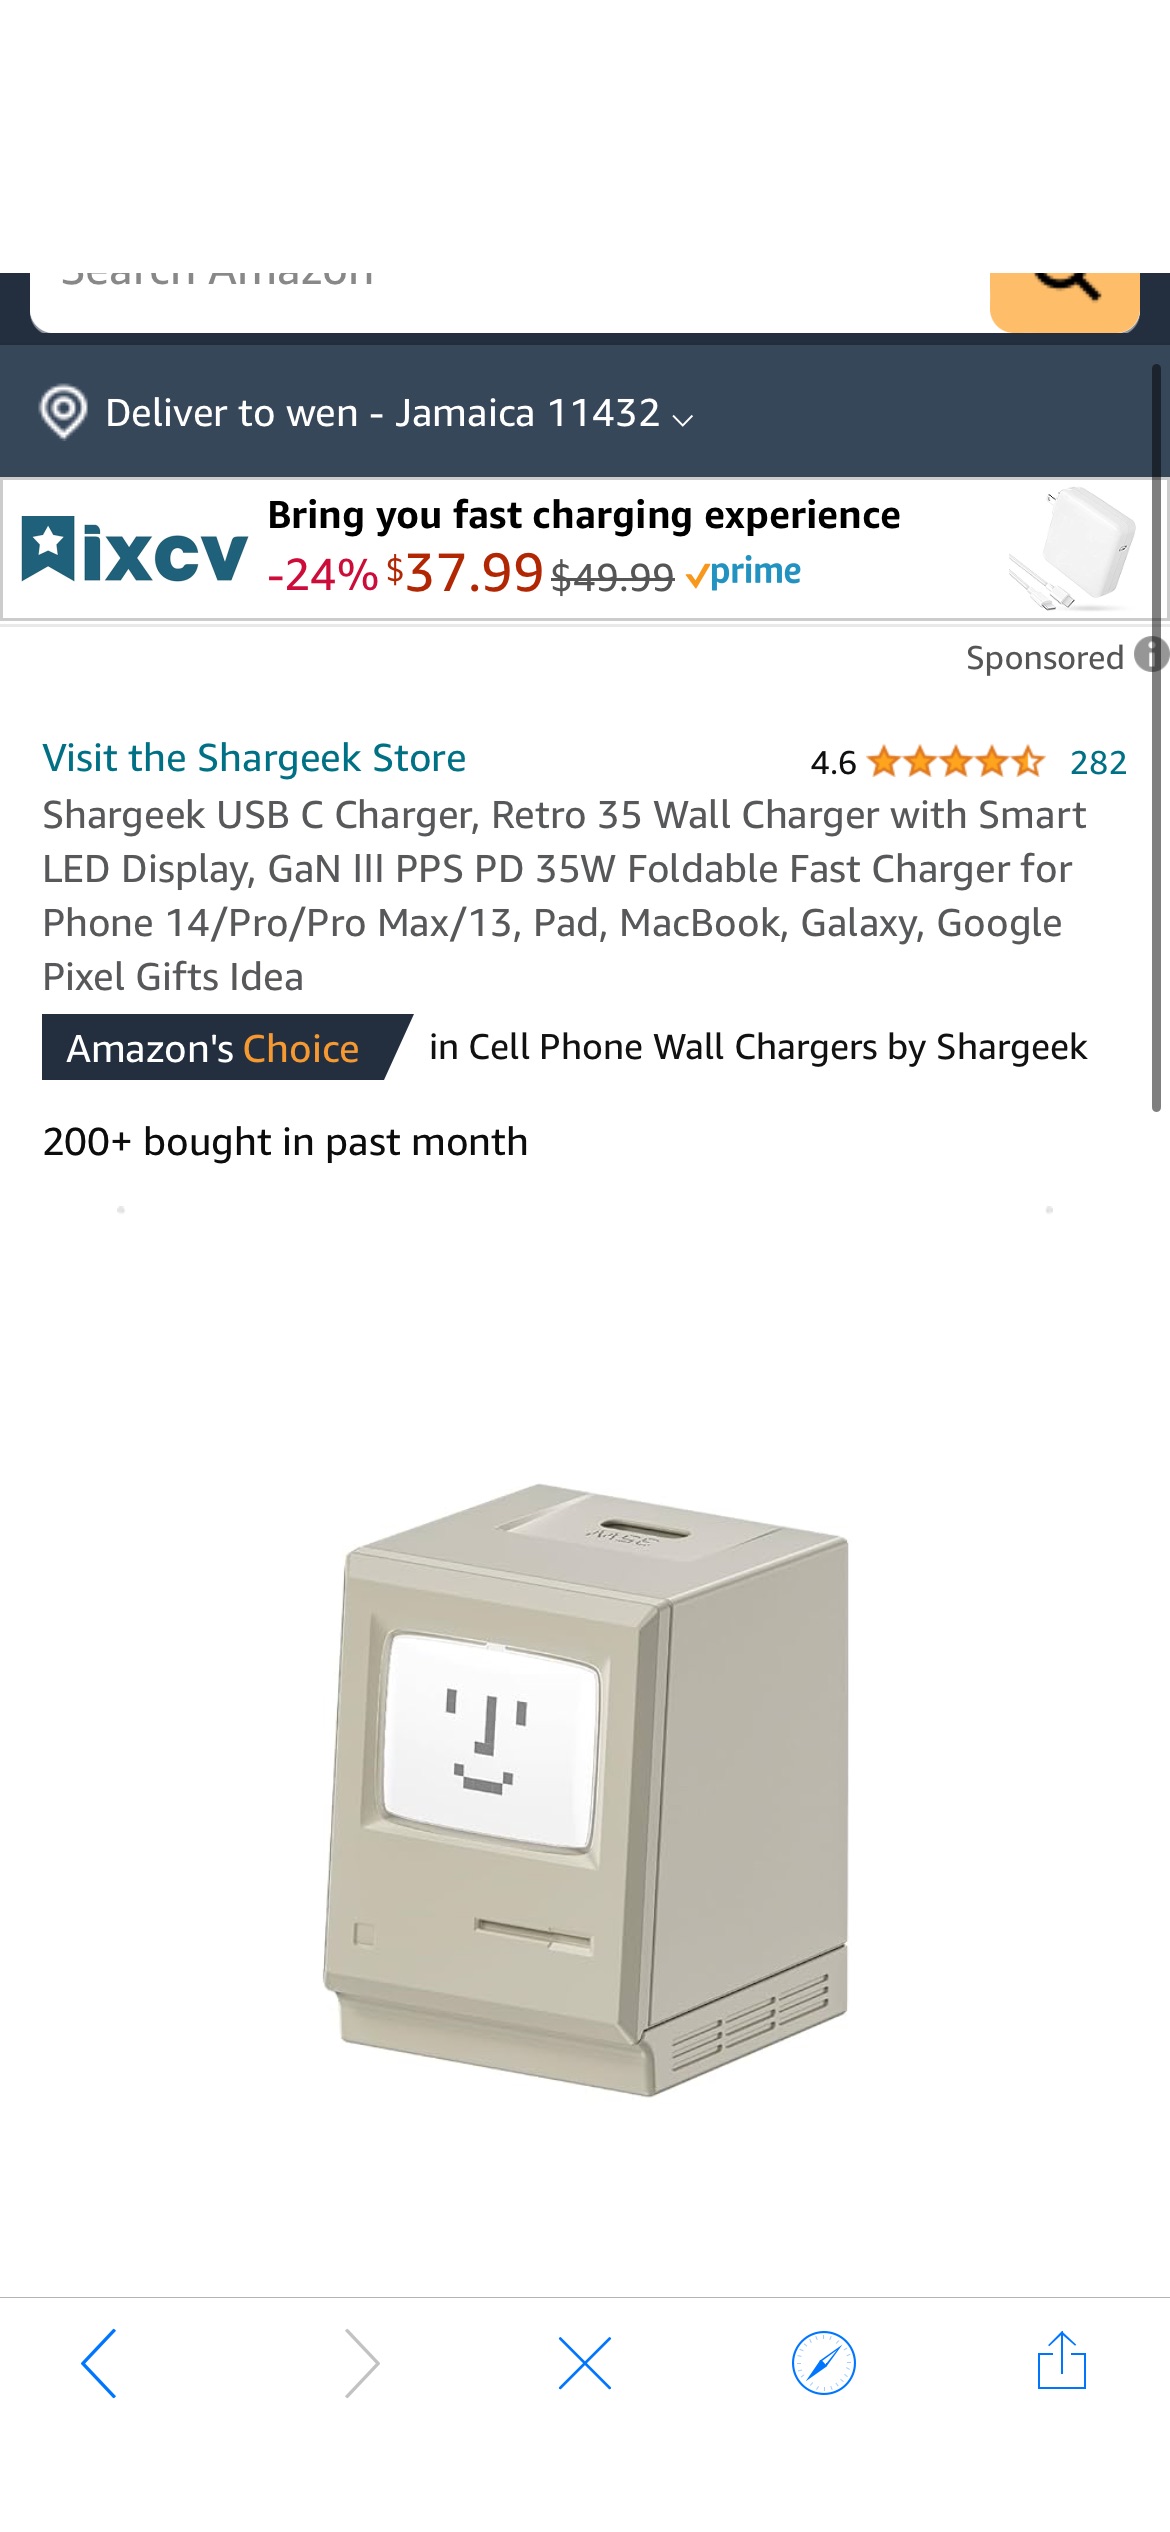 Amazon.com: Shargeek USB C Charger, Retro 35 Wall Charger with Smart LED Display, GaN Ⅲ PPS PD 35W Foldable Fast Charger for Phone 14/Pro/Pro Max/13, Pad, MacBook, Galaxy, Google Pixel Gifts Idea : Ce